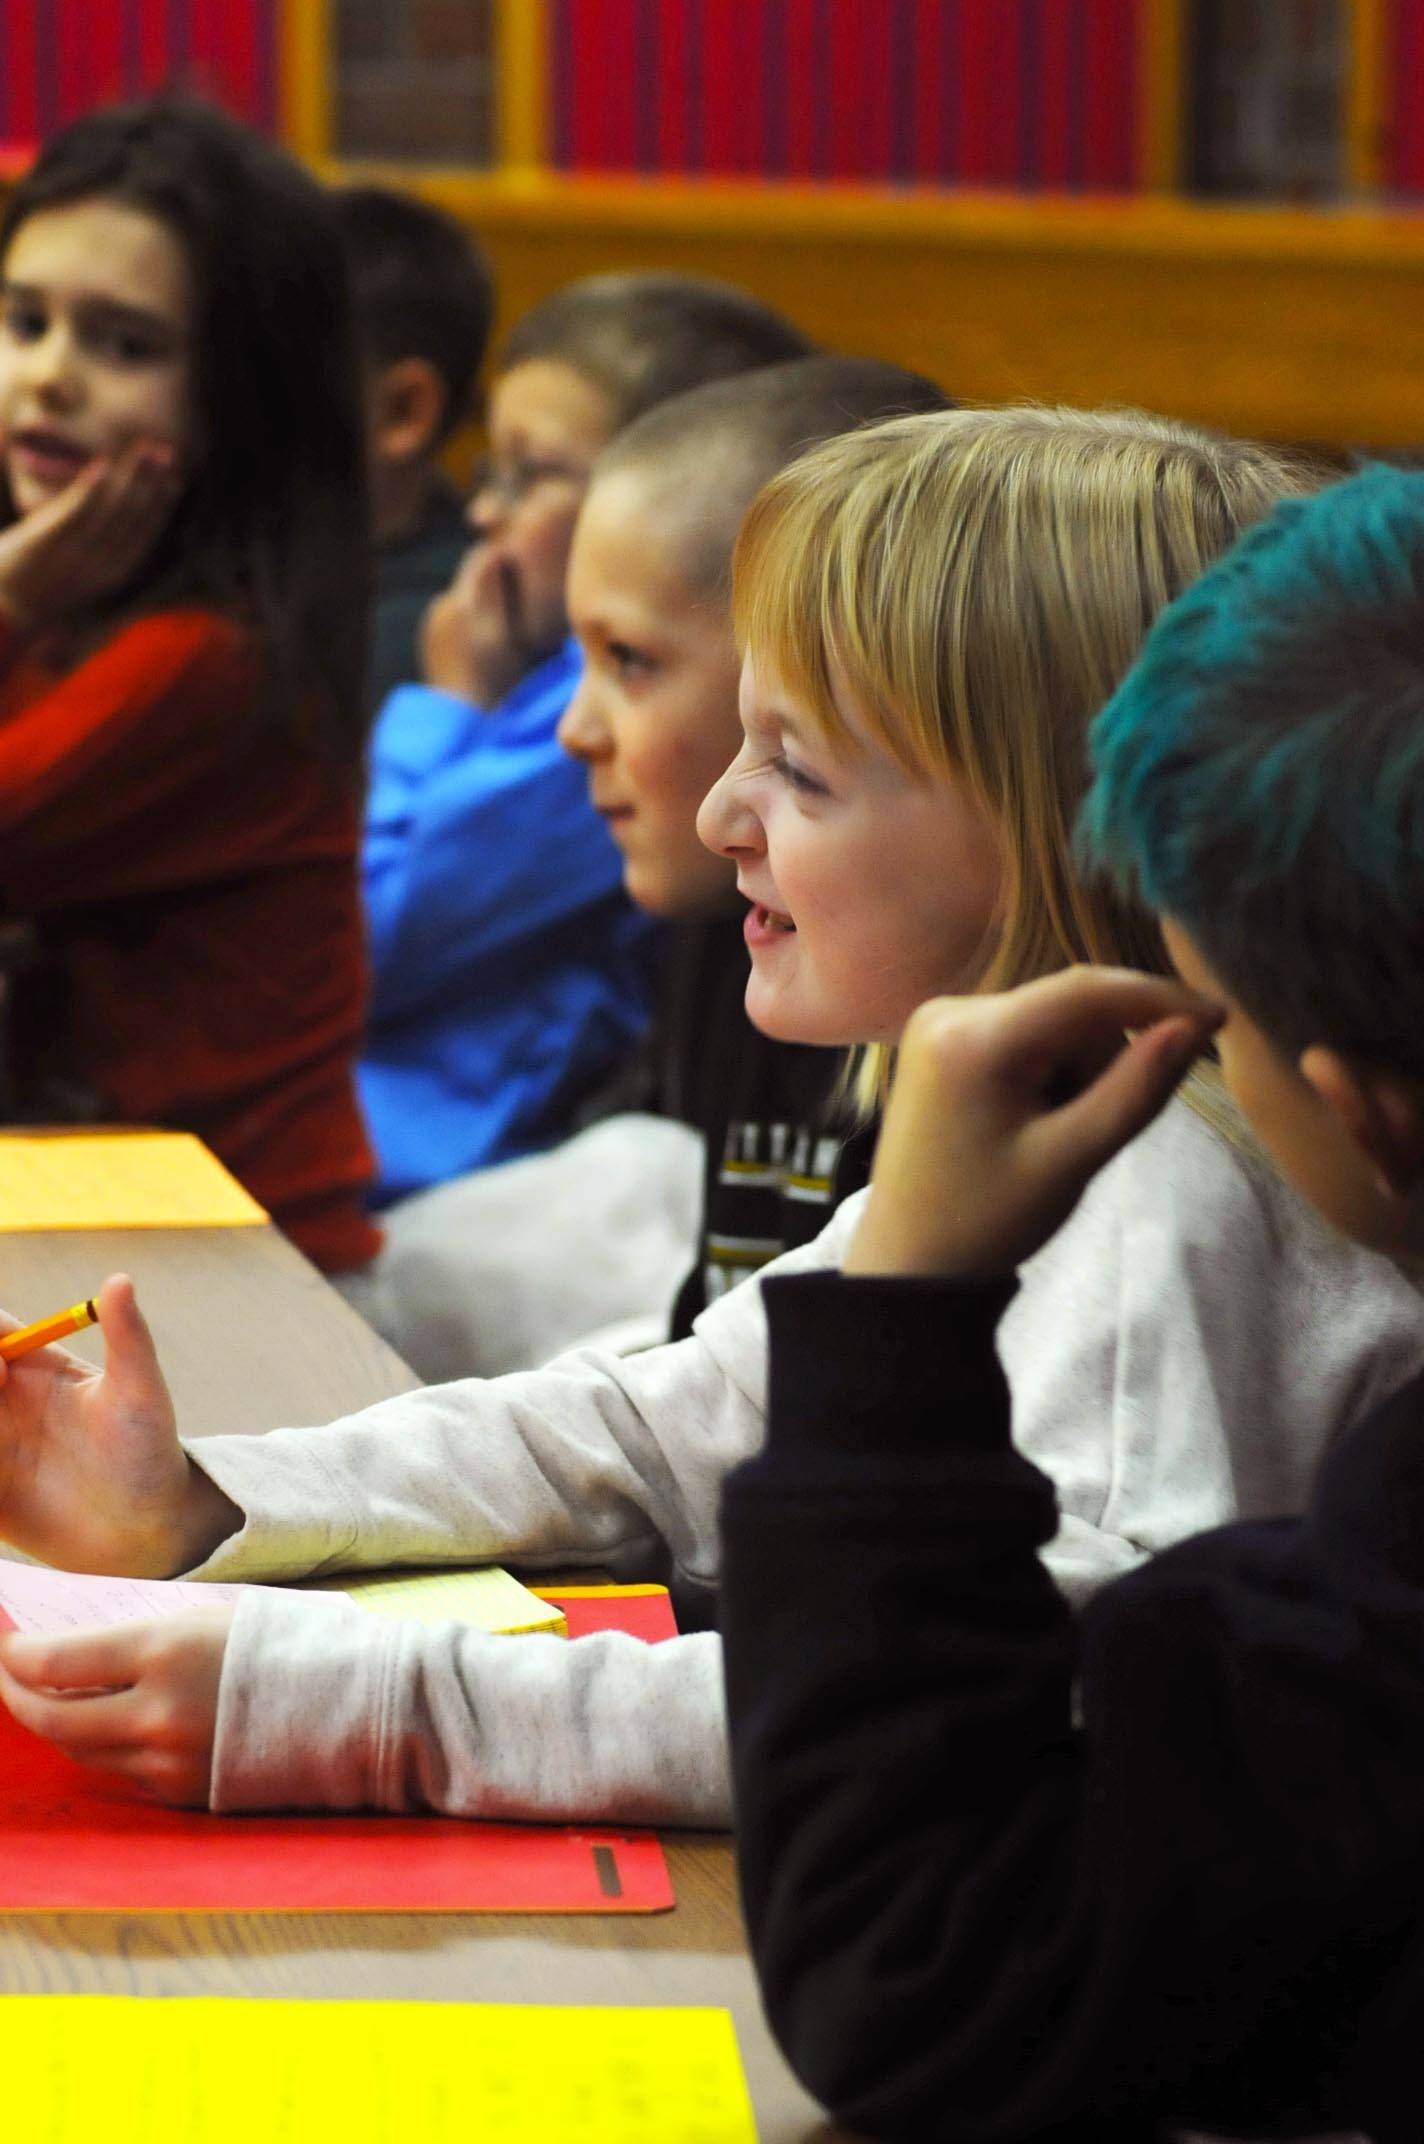 Riley Smith, a second-grader at Kalifornsky Beach Elementary School, makes a face during a witness’s statement during the class’s mock trial of “Arthur T. Grinch,” based on the Dr. Seuss classic “How the Grinch Stole Christmas” on Thursday, Nov. 9, 2017 in Kenai, Alaska. The class has been studying civics and learning about the court process and put on a mock sentencing hearing, complete with witnesses and a jury composed of students’ parents and K-Beach Elementary Principal Nate Crabtree. (Photo by Elizabeth Earl/Peninsula Clarion)